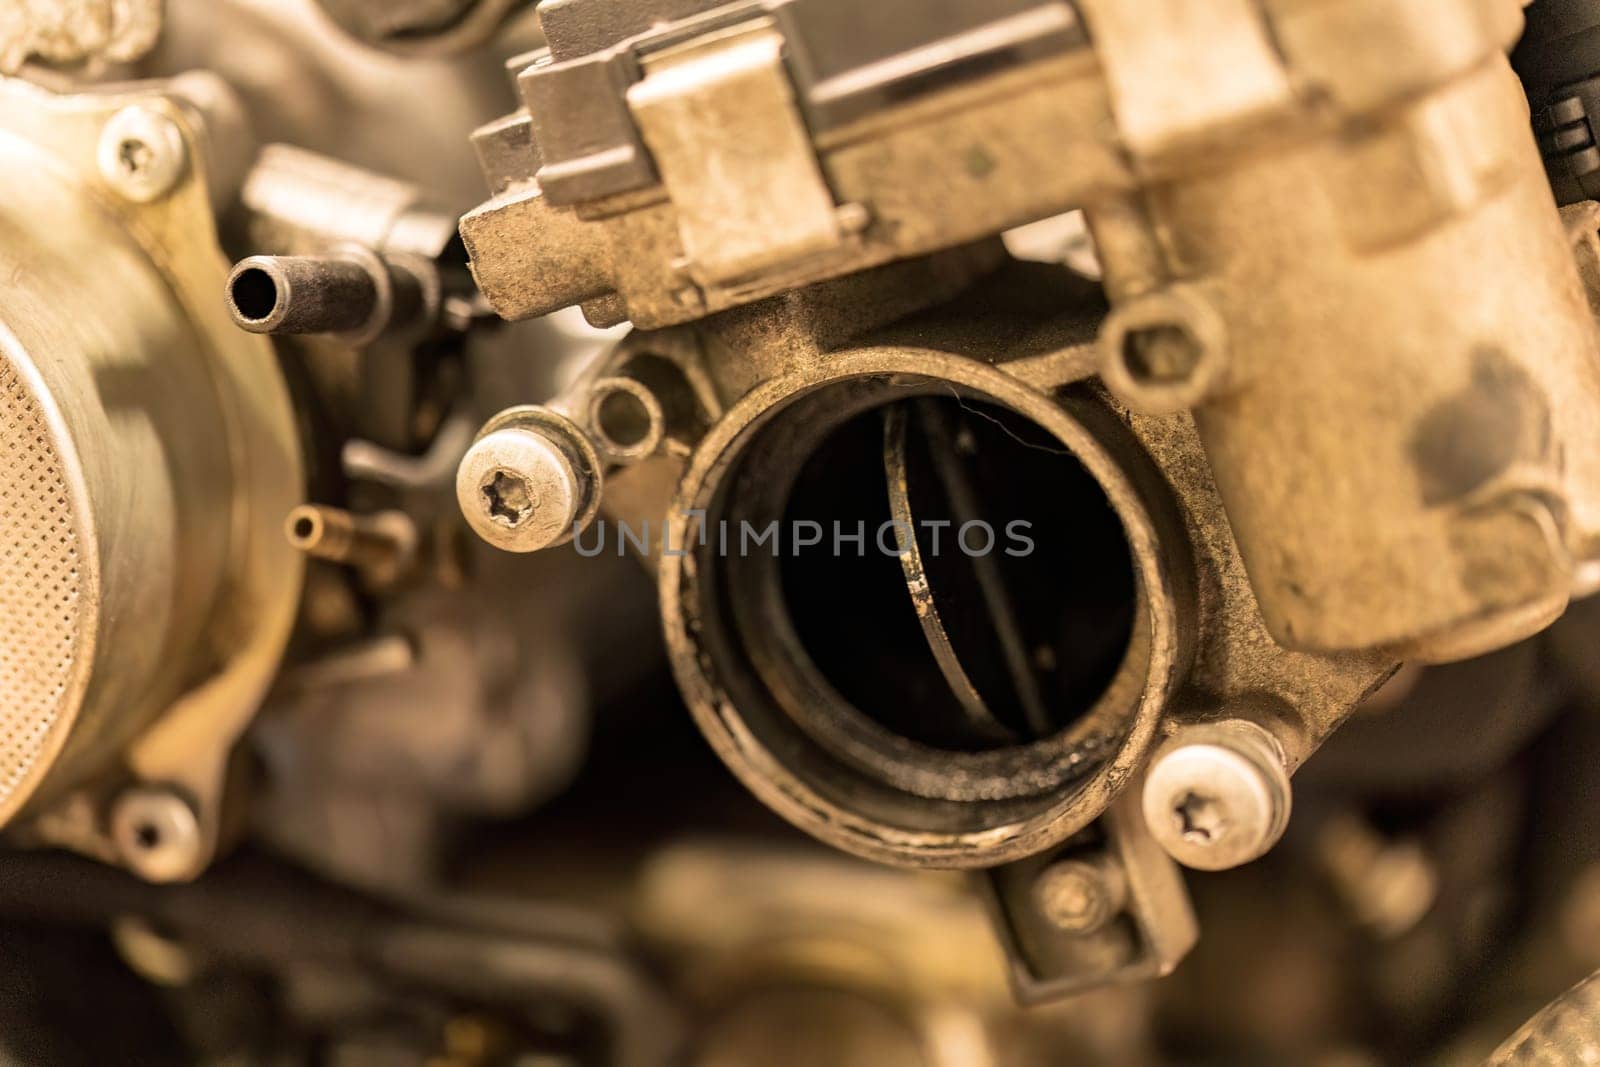 Dirty Throttle Valve in Car Engine by pippocarlot